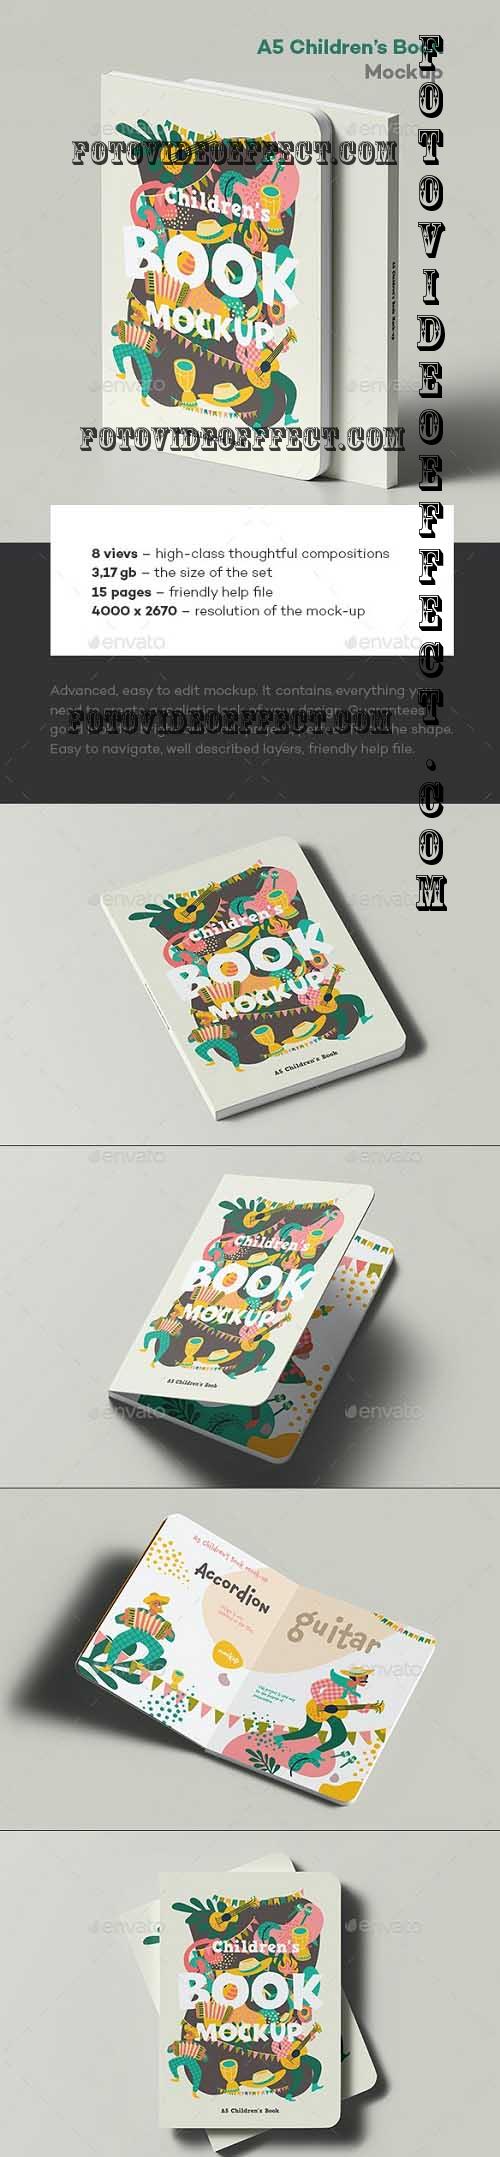 A5 Childrens Book Mock-up - 36789703